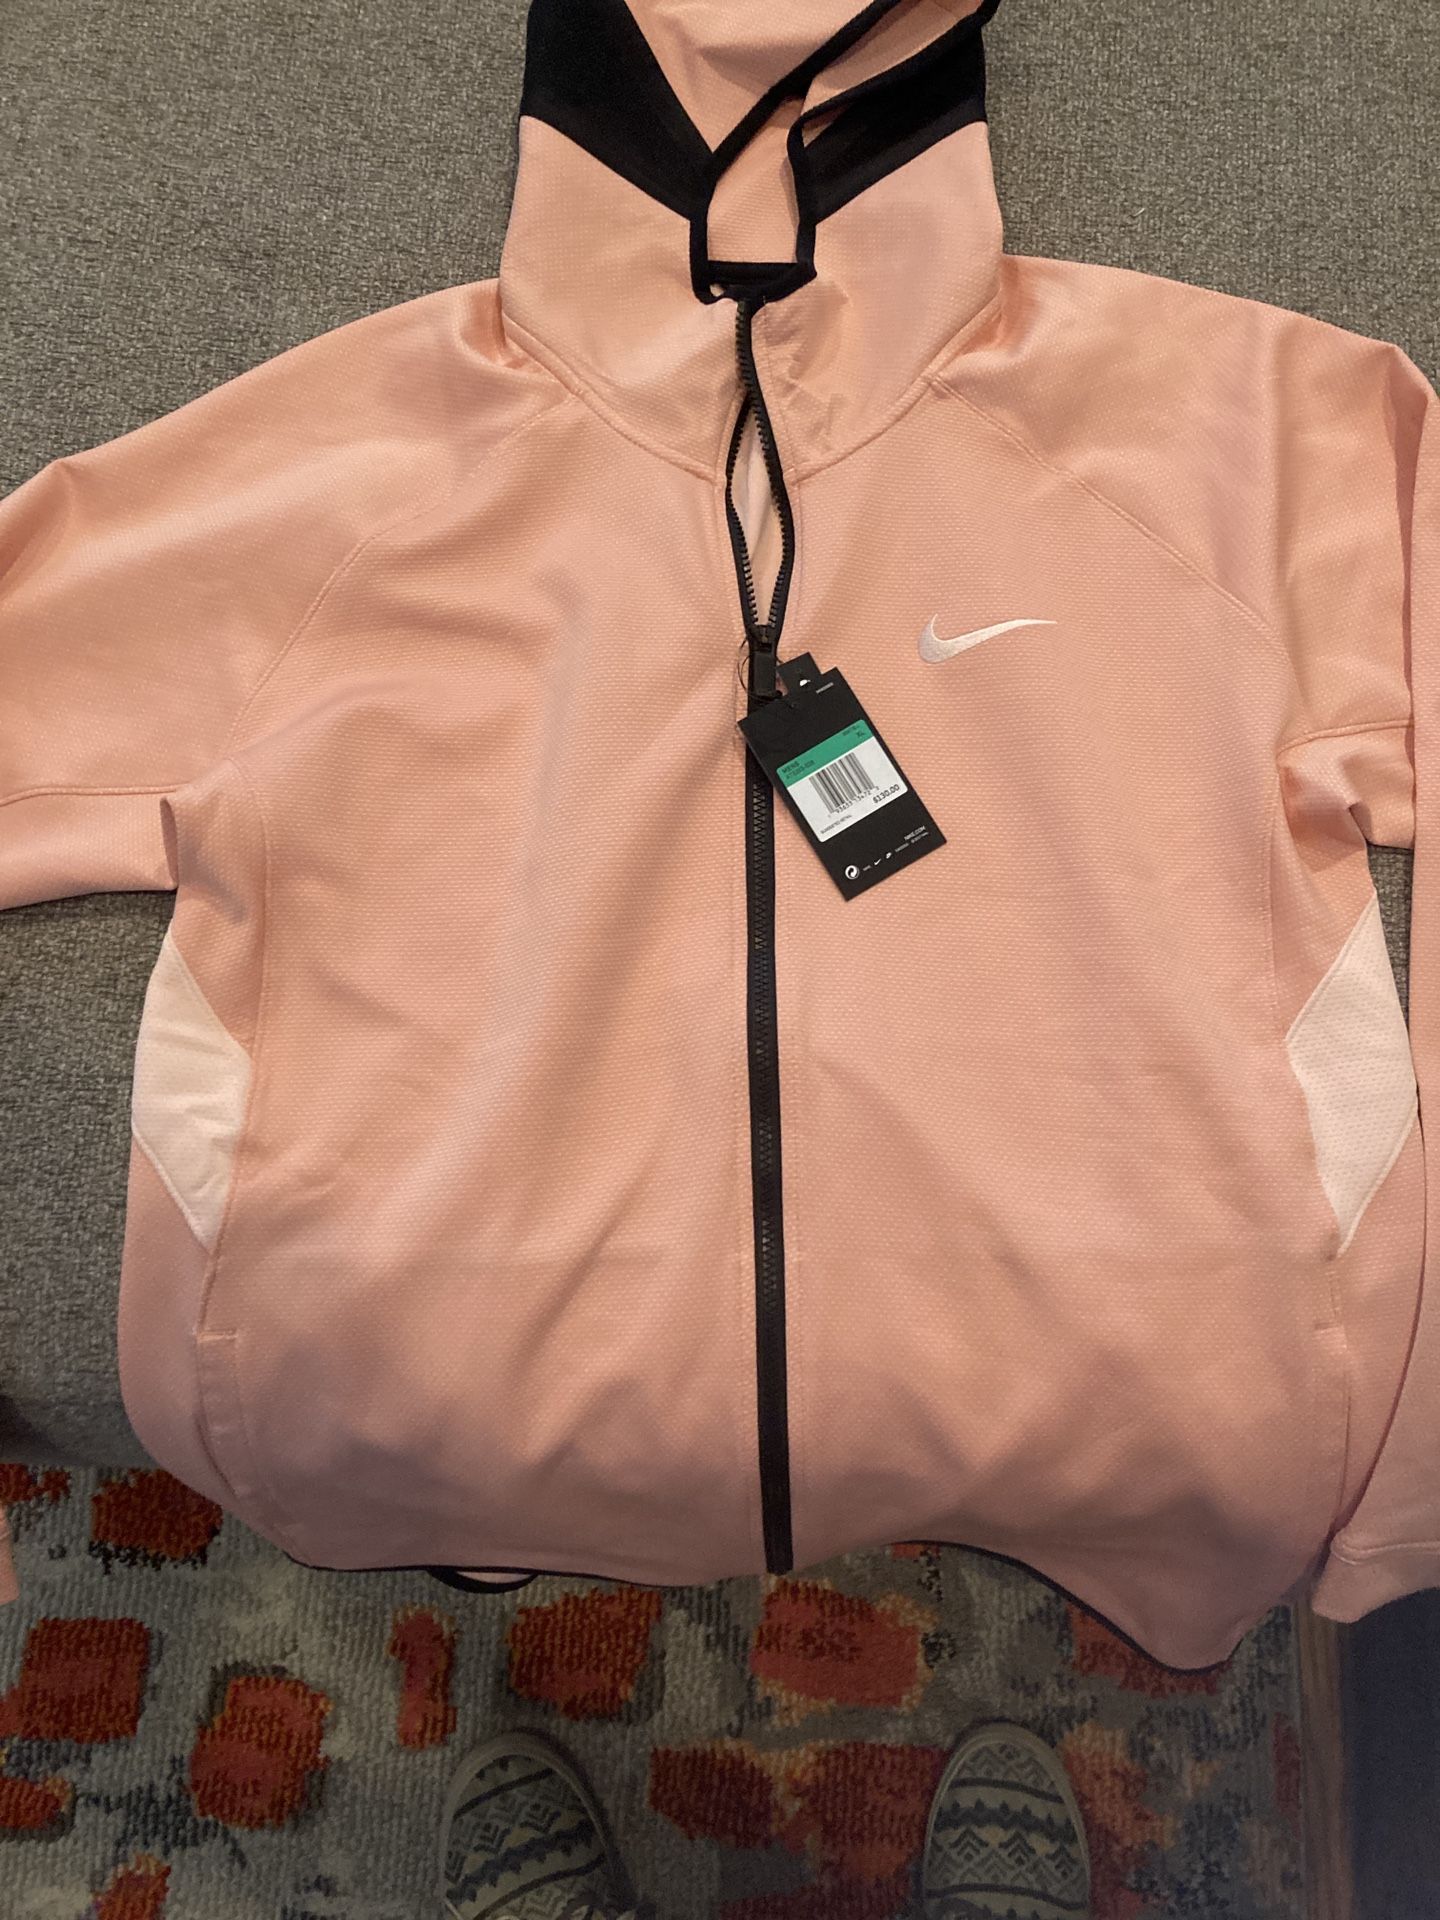 Men's Nike Therma Flex Showtime Basketball Hoodie Pink AT3263-032 NWT Size XL